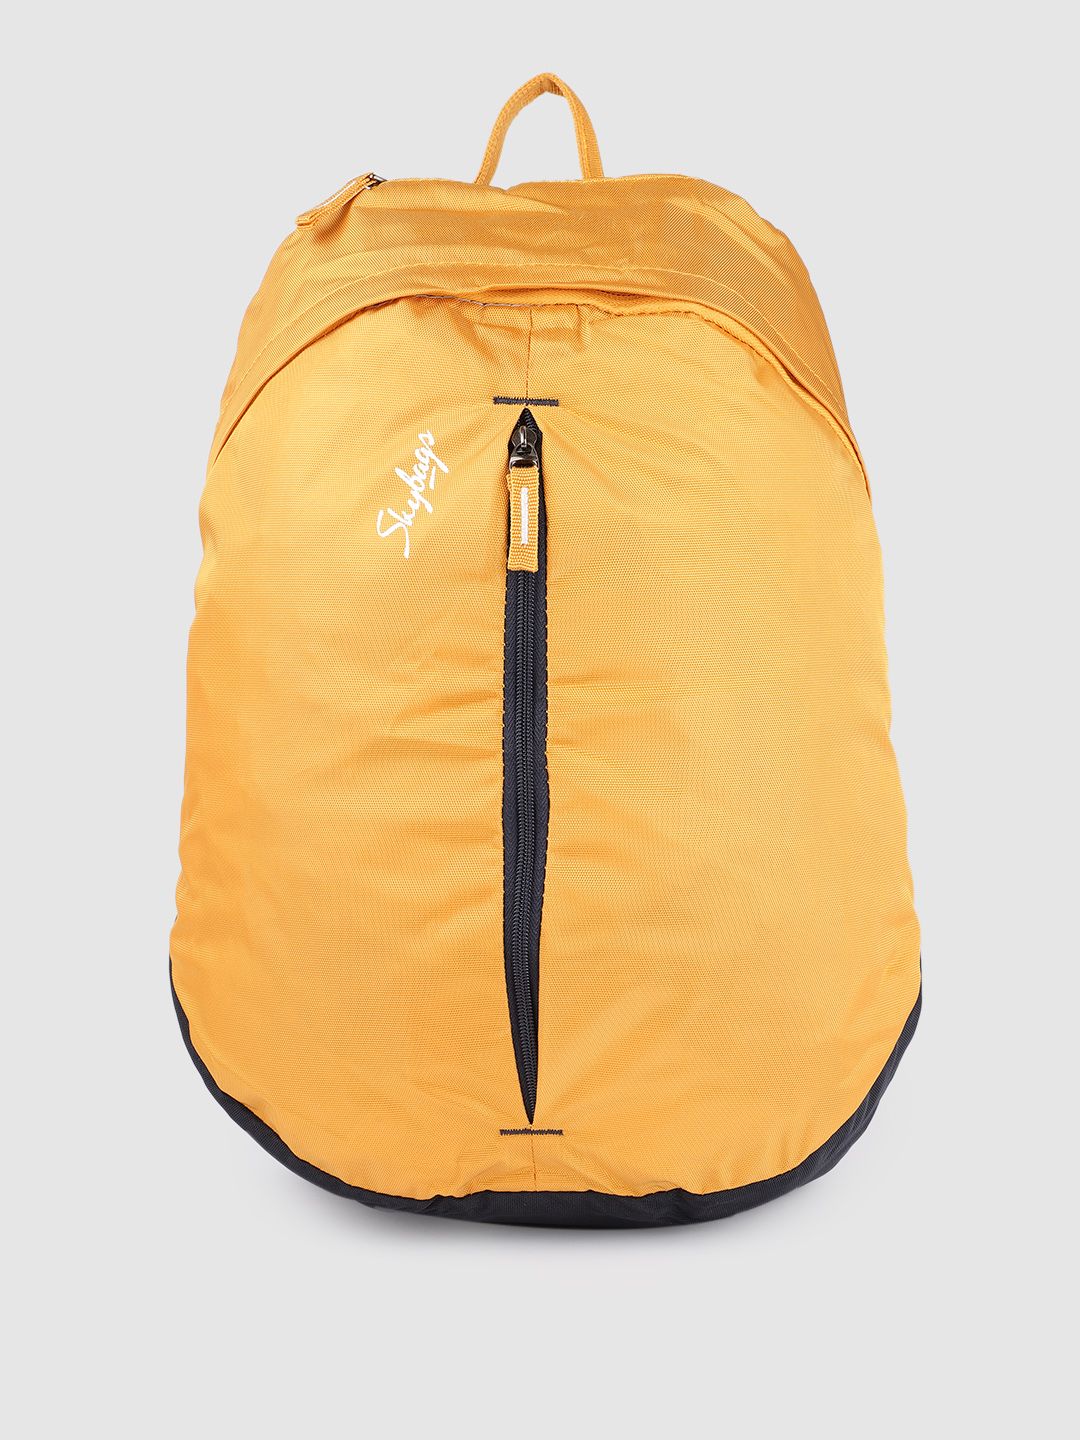 Skybags Unisex Yellow Solid Backpack Price in India